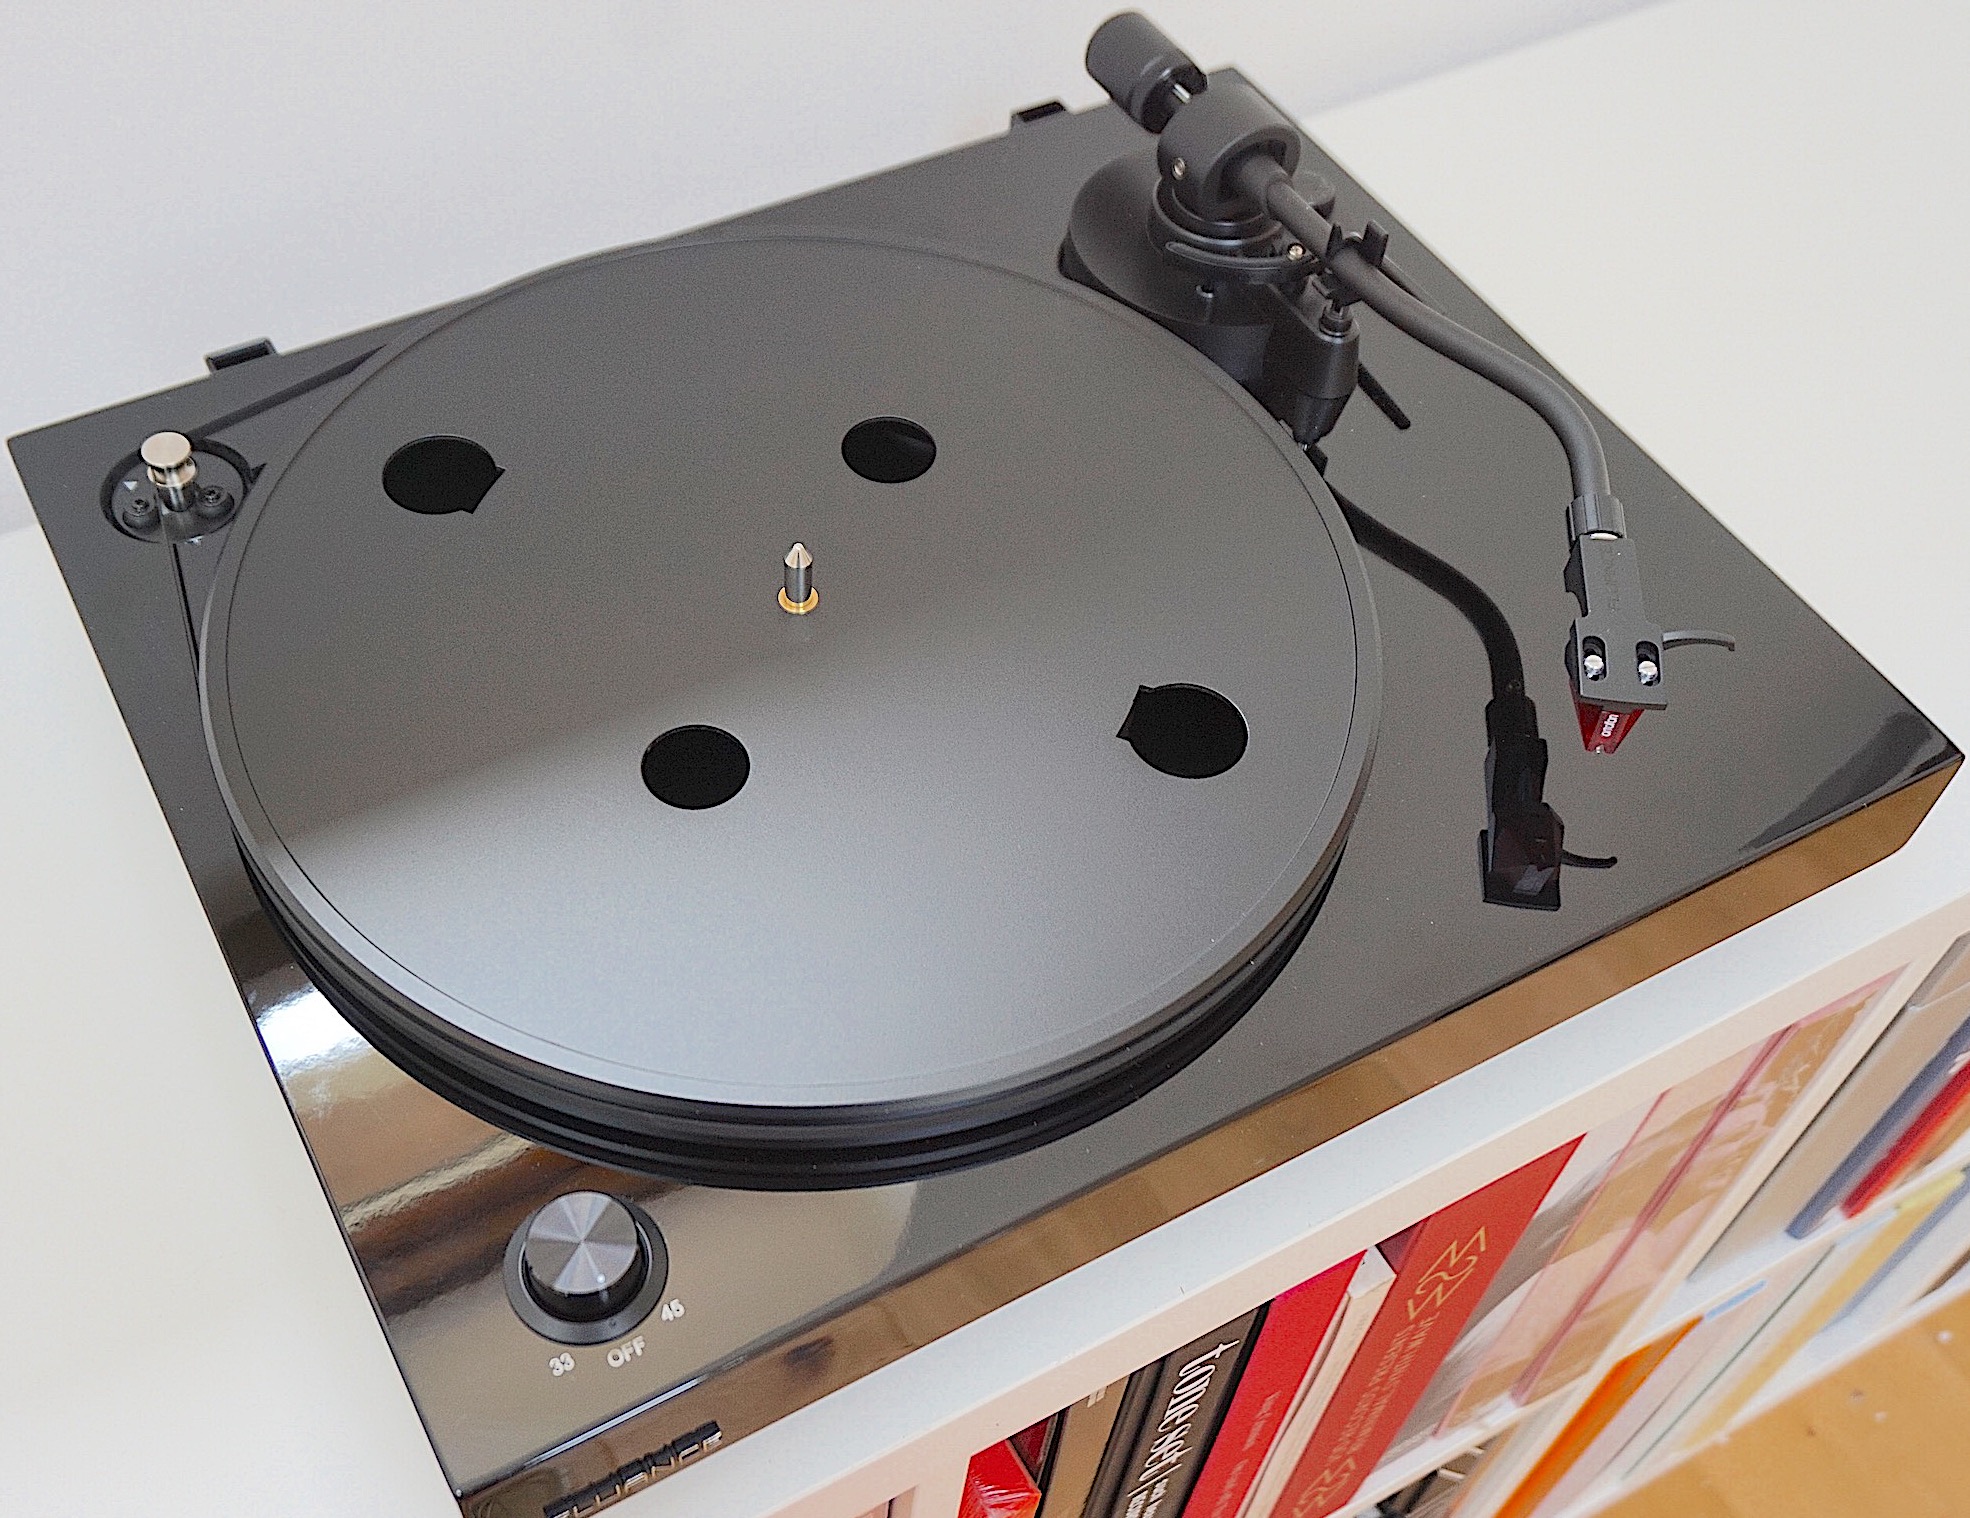 RT83 Turntable From Fluance